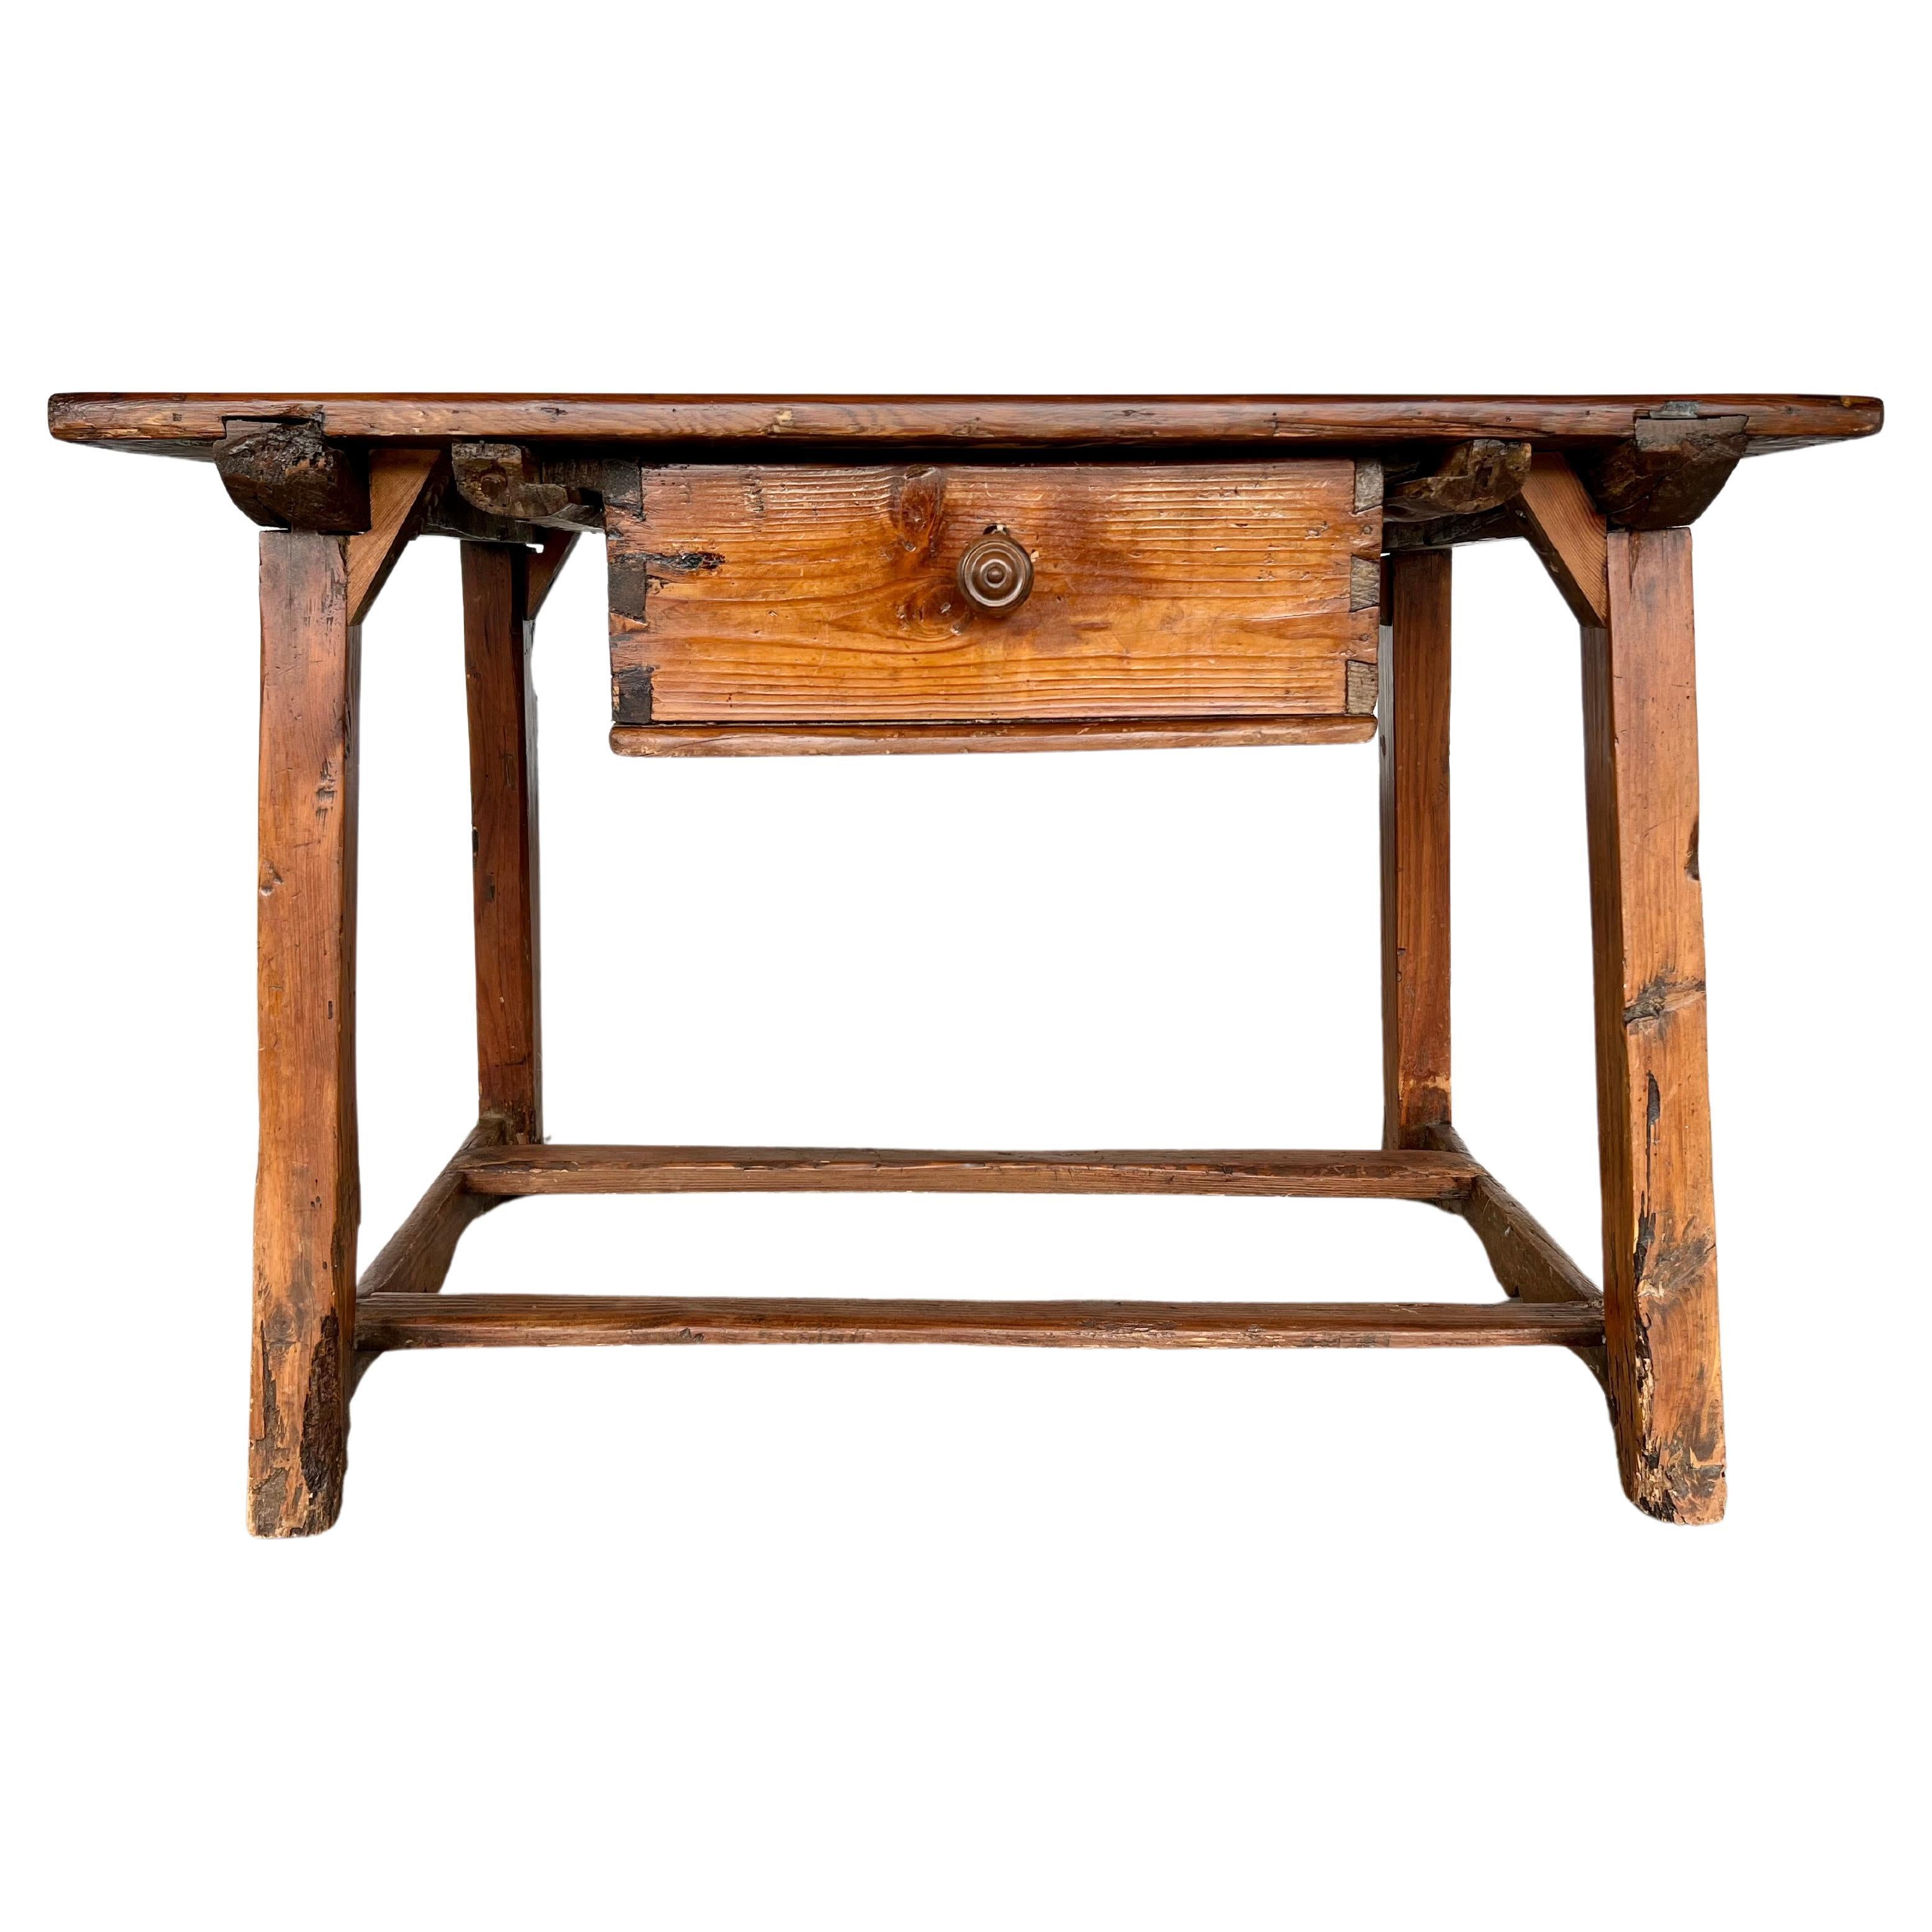 Antique 17c Spanish Rustic Work Table or Side Kitchen Table With Single Drawer For Sale